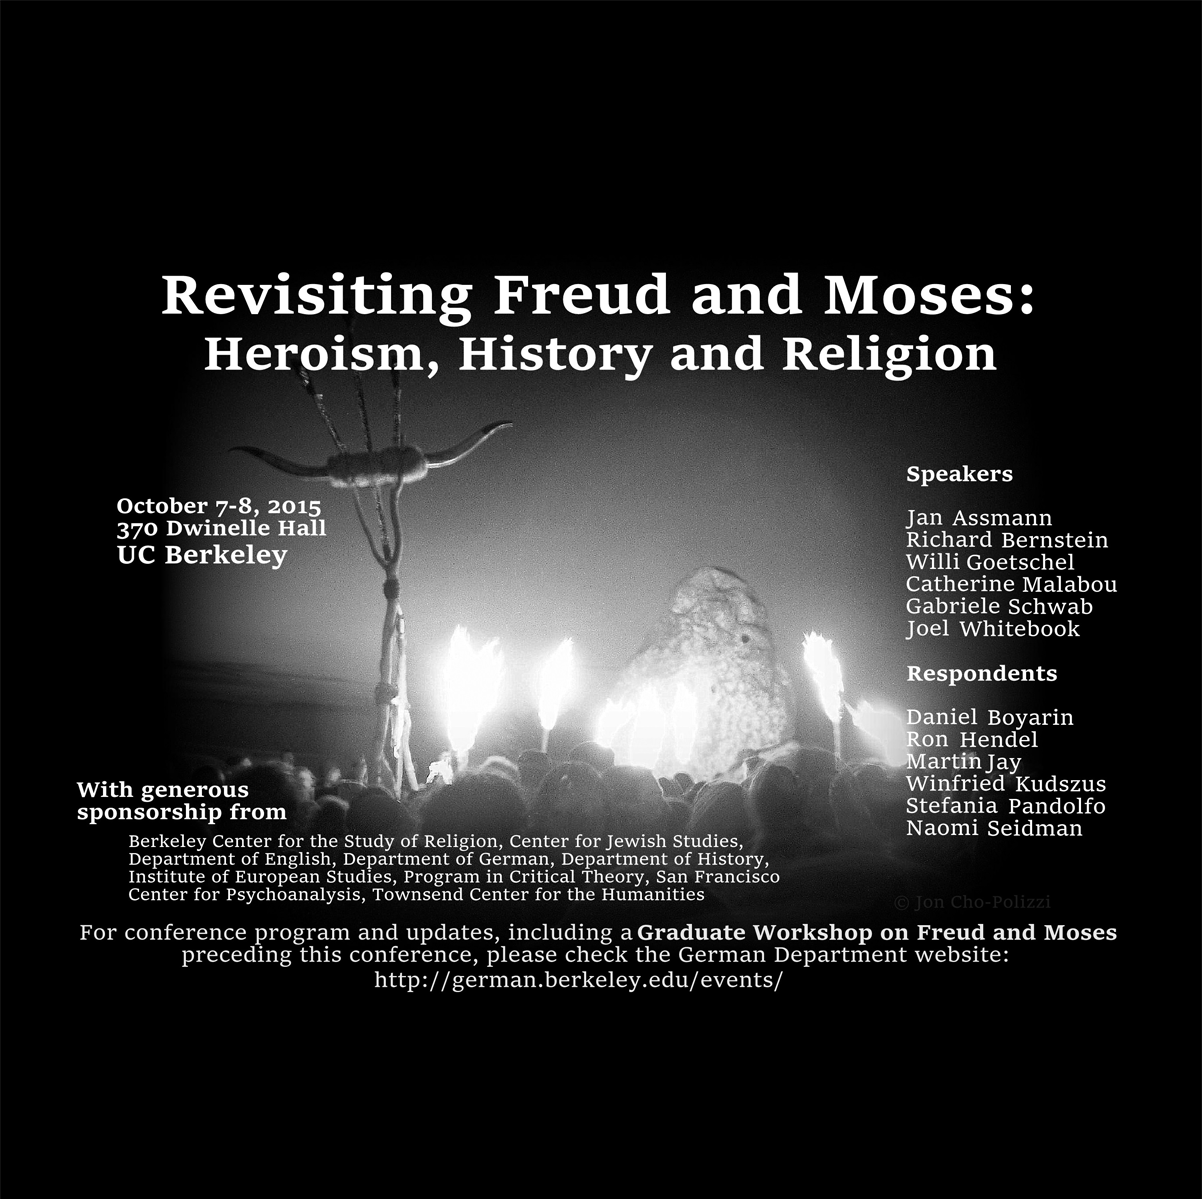 Revisiting Freud and Moses: Heroism, History and Religion